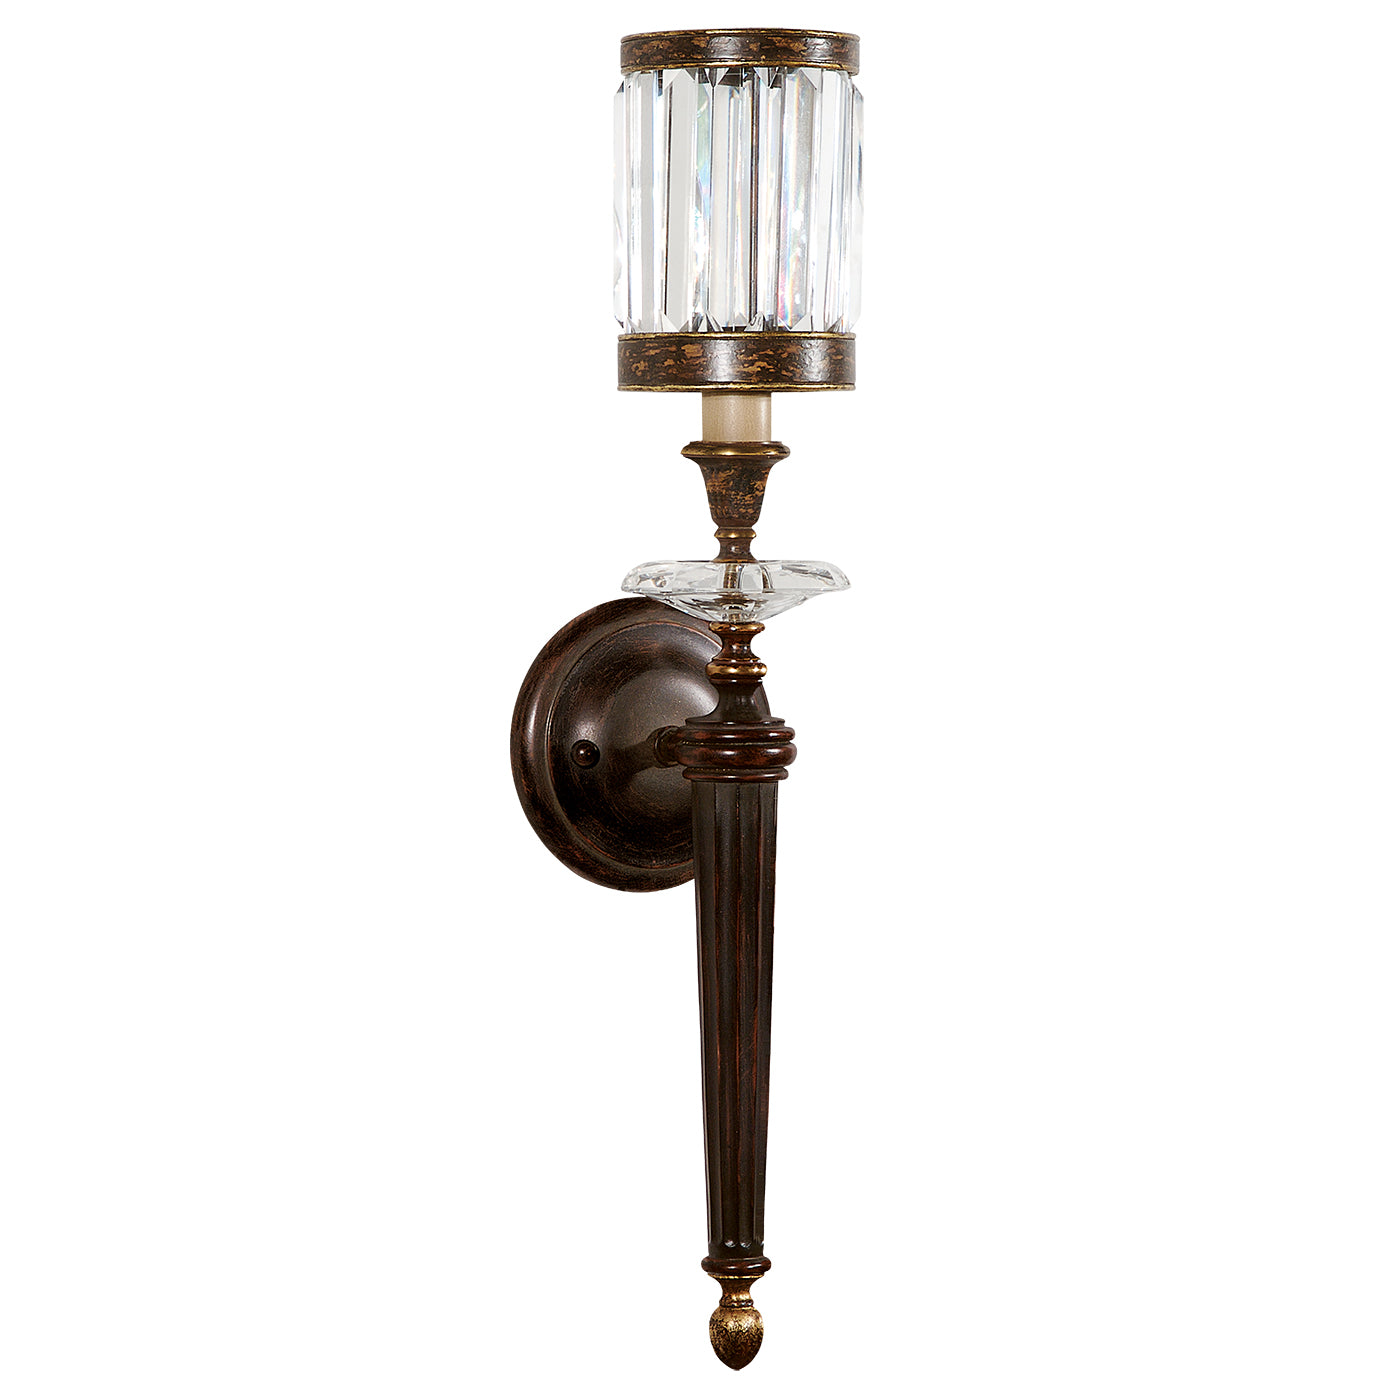 Fine Art Handcrafted Lighting Eaton Place Sconce